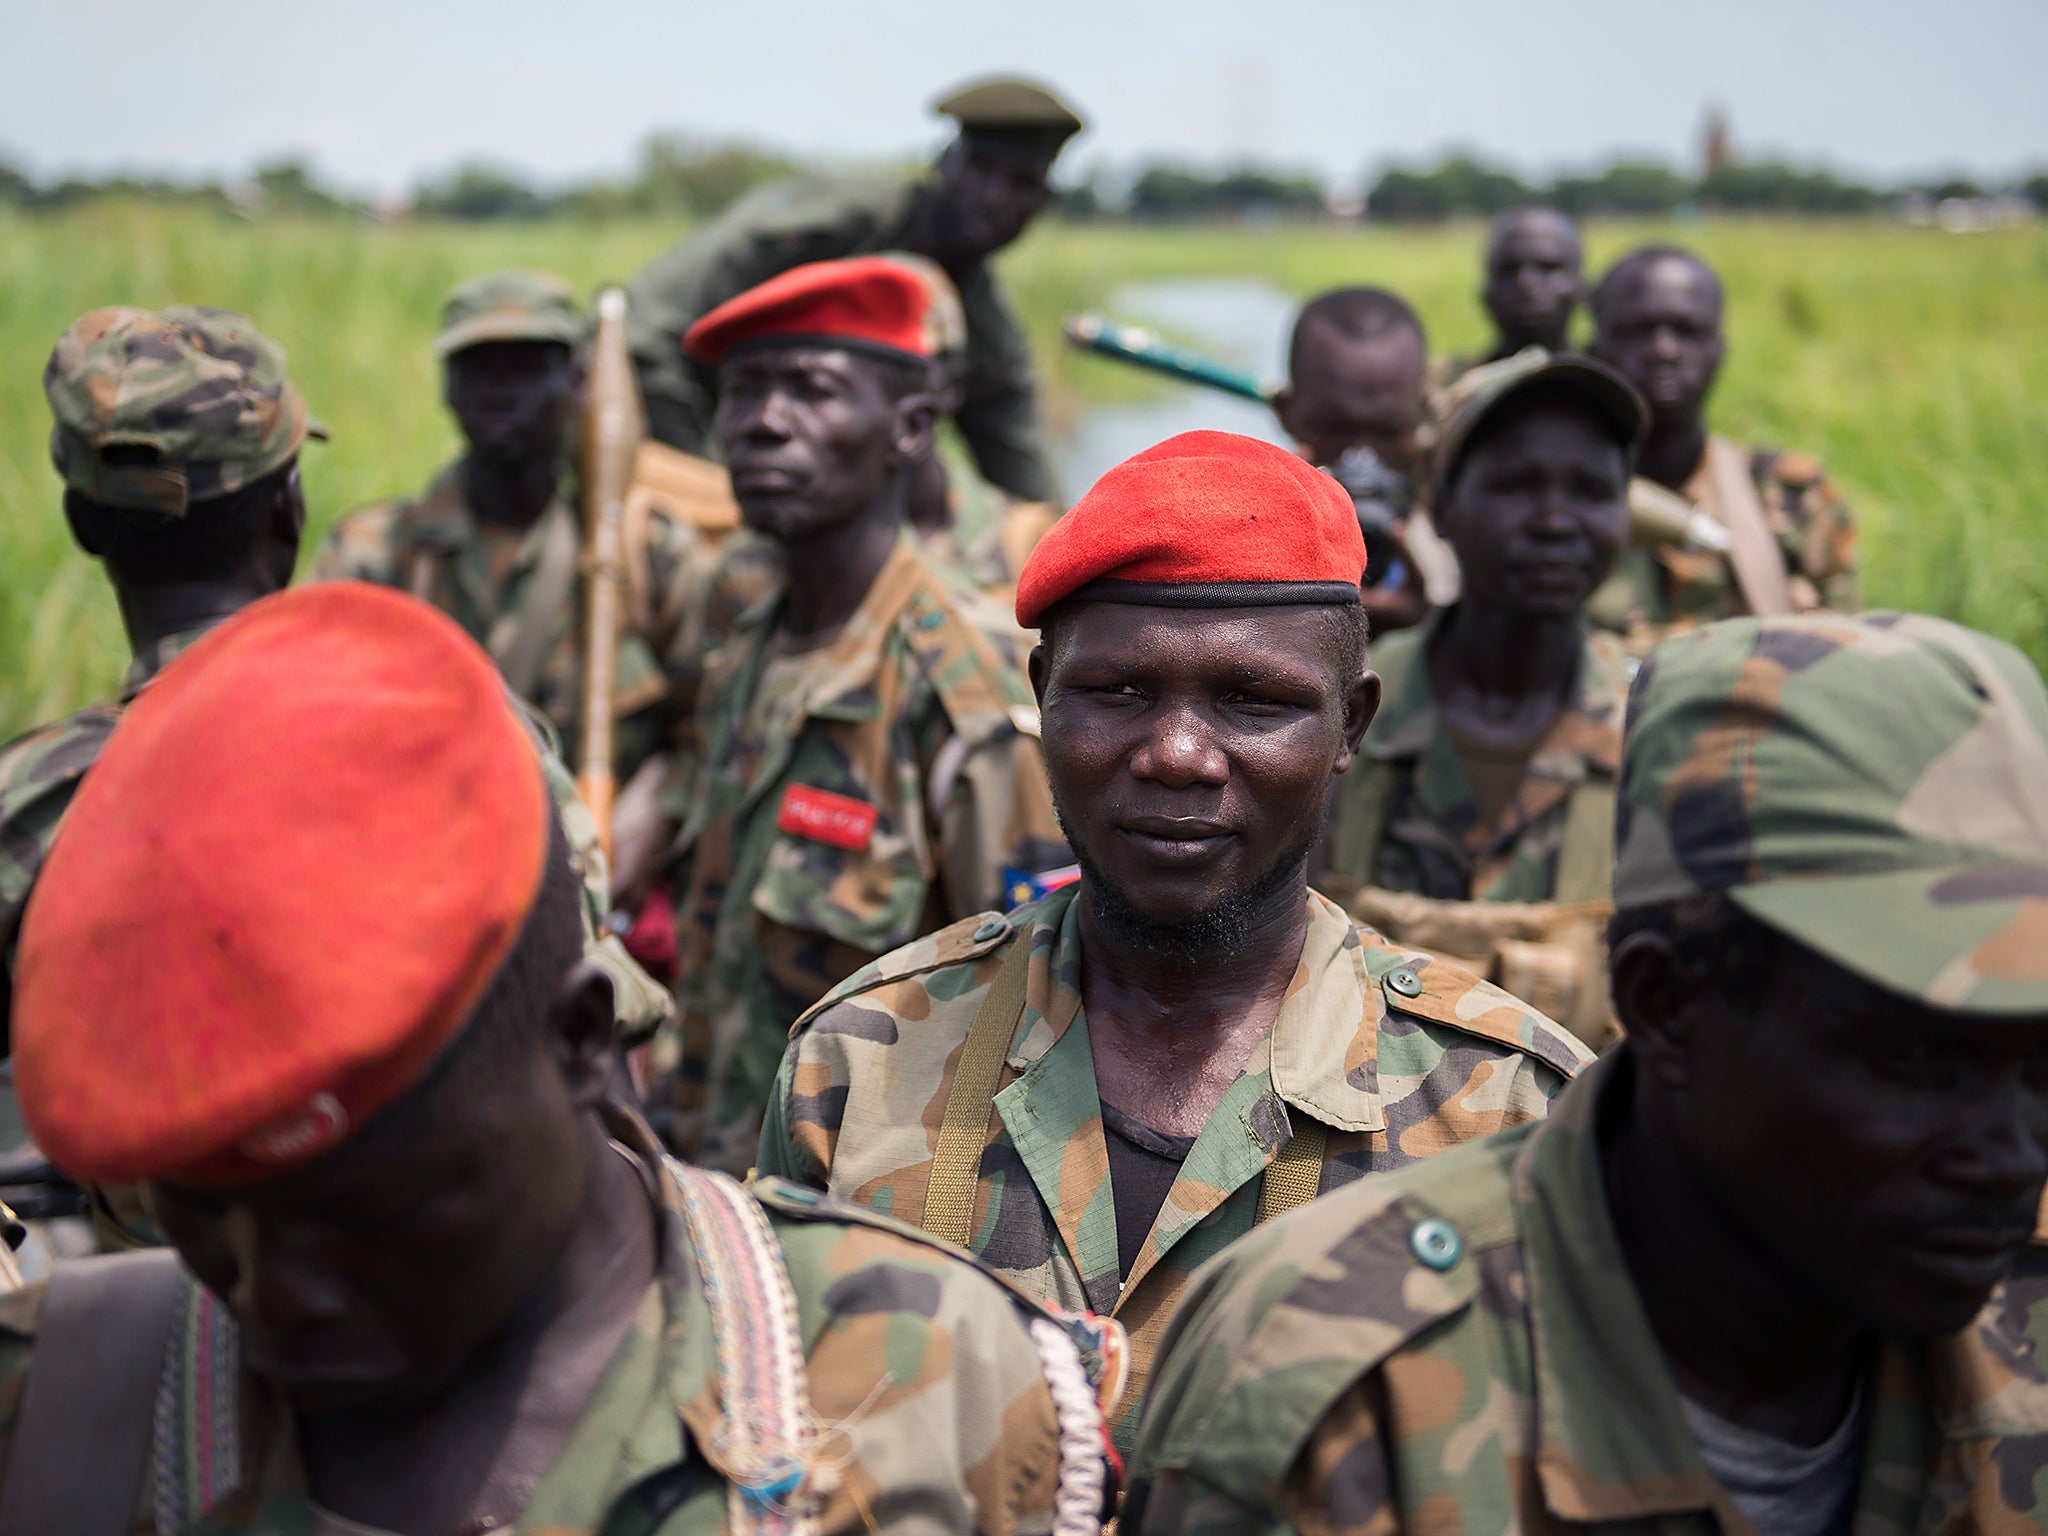 Sudan People Liberation Army (SPLA) soldiers ride on a boat on the Nile River near Alole, northern South Sudan